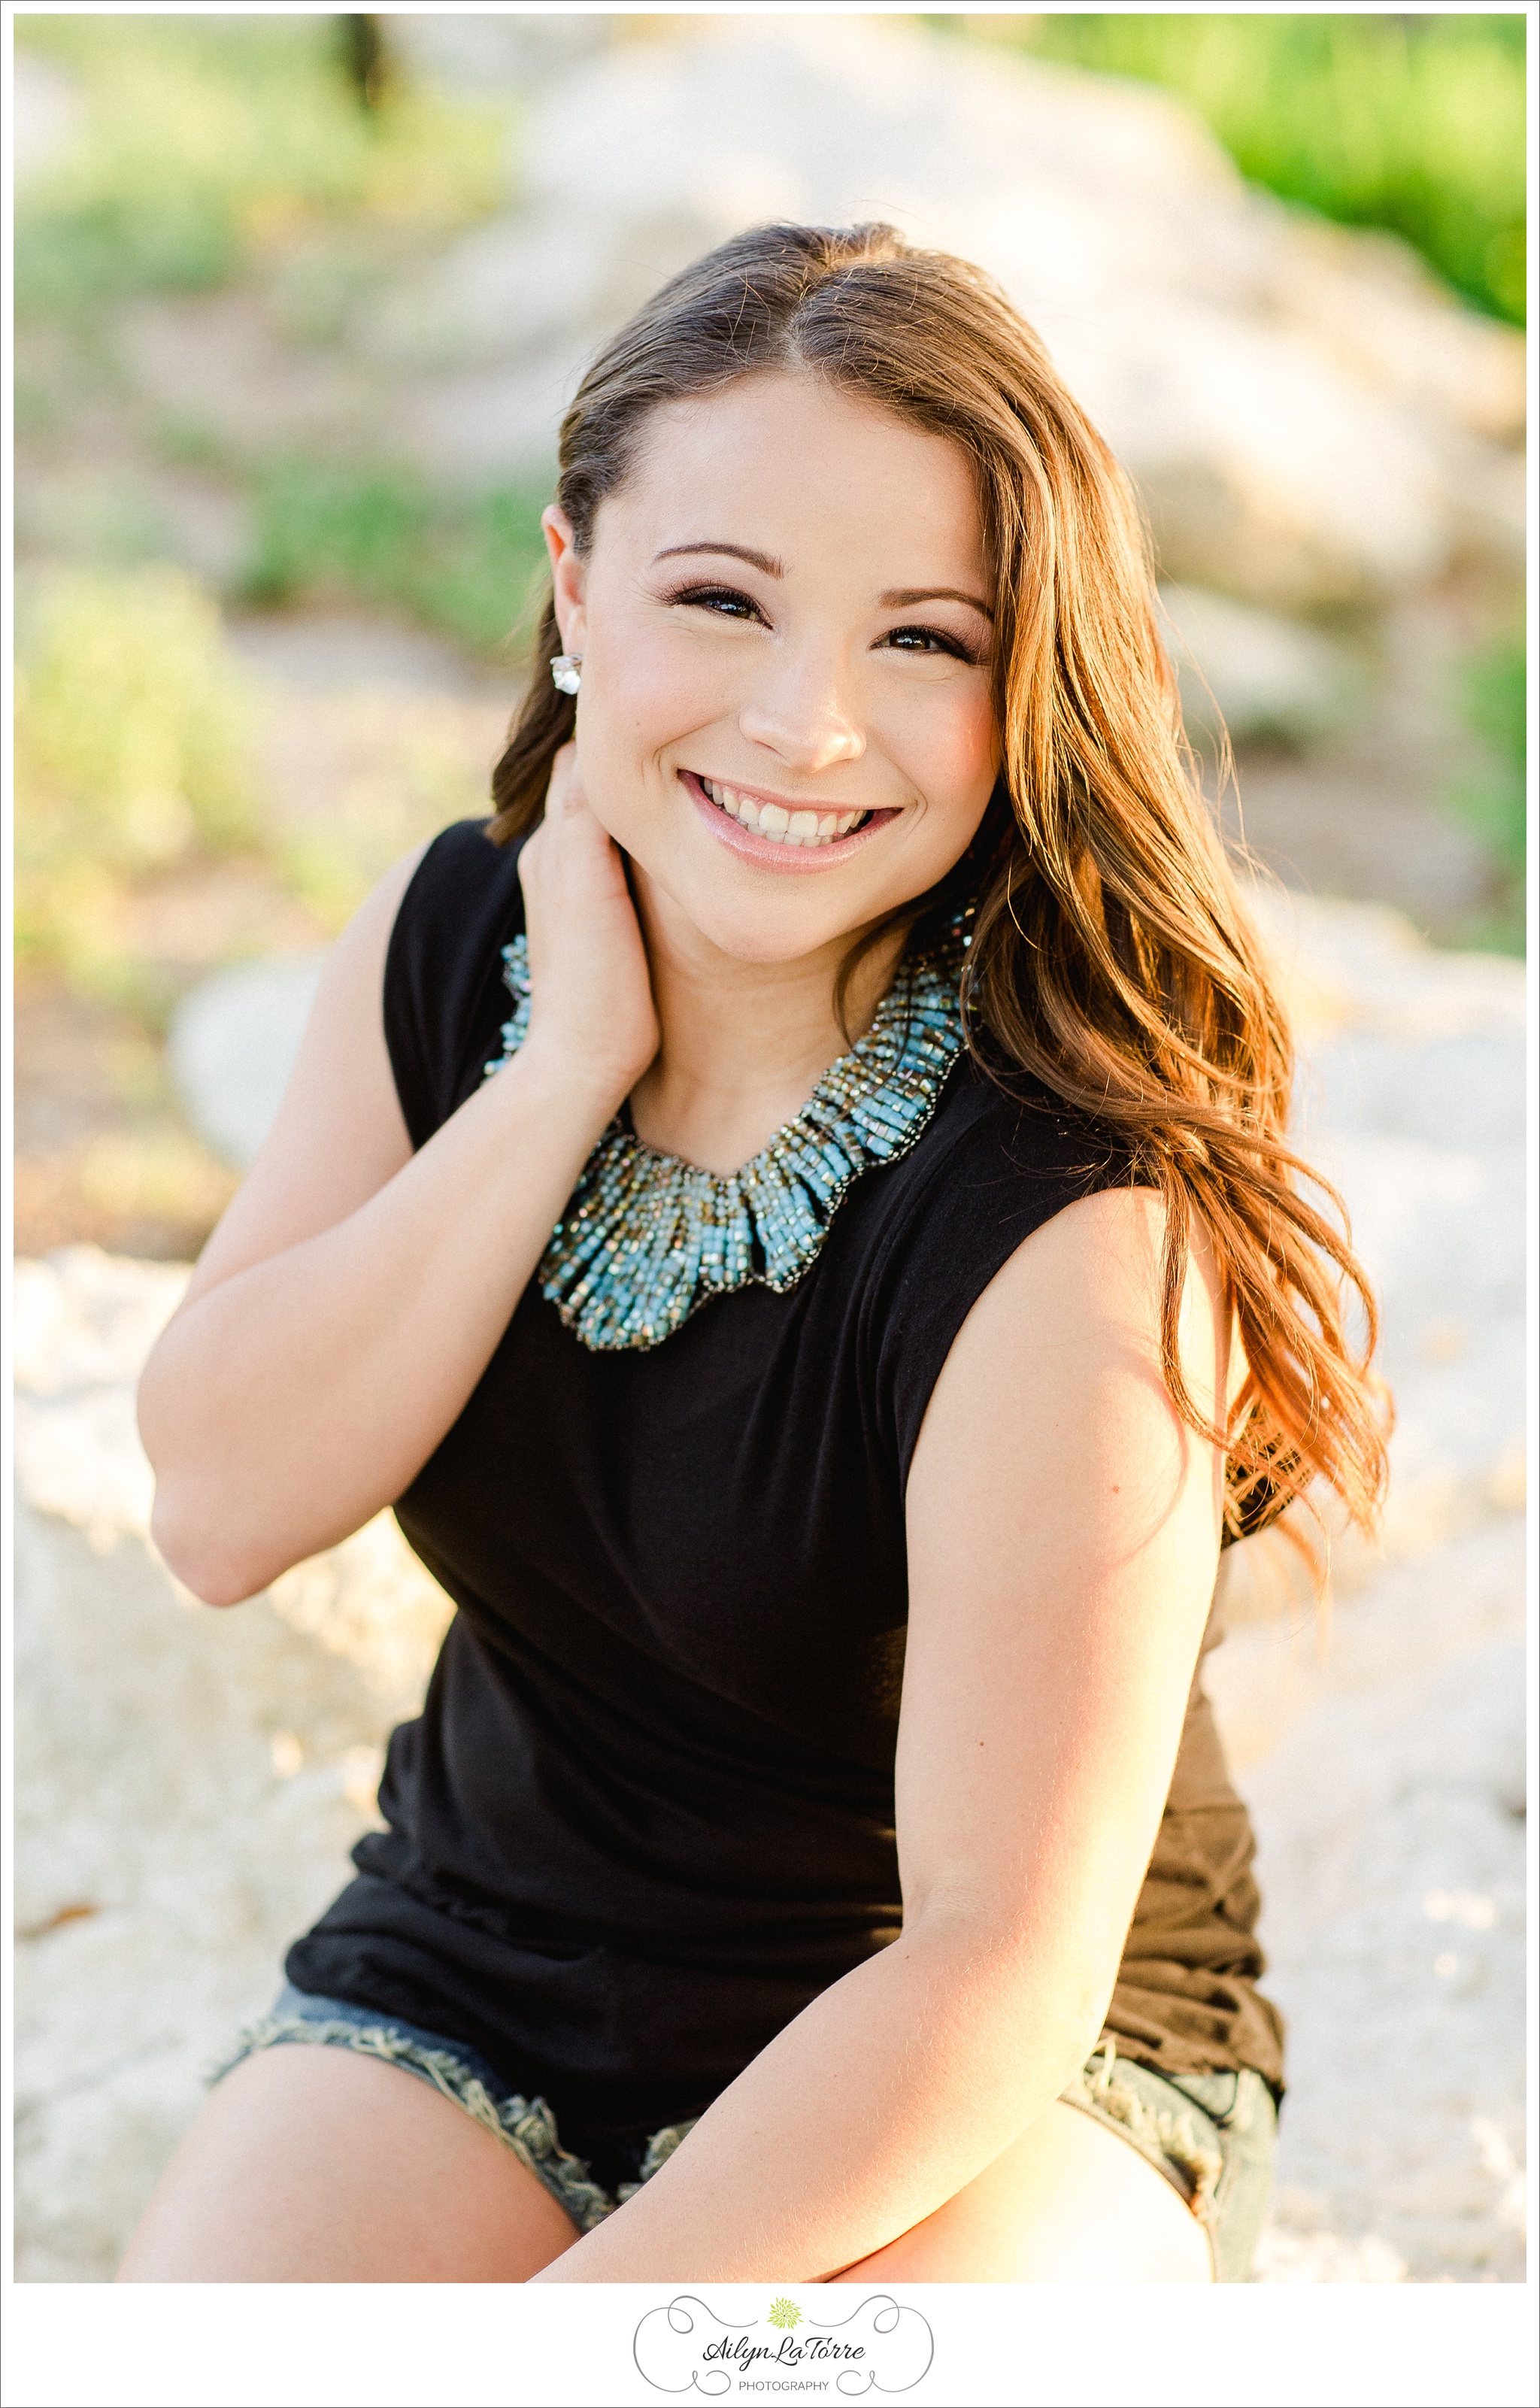 South Tampa Senior Photographer | © Ailyn La Torre Photography 2015